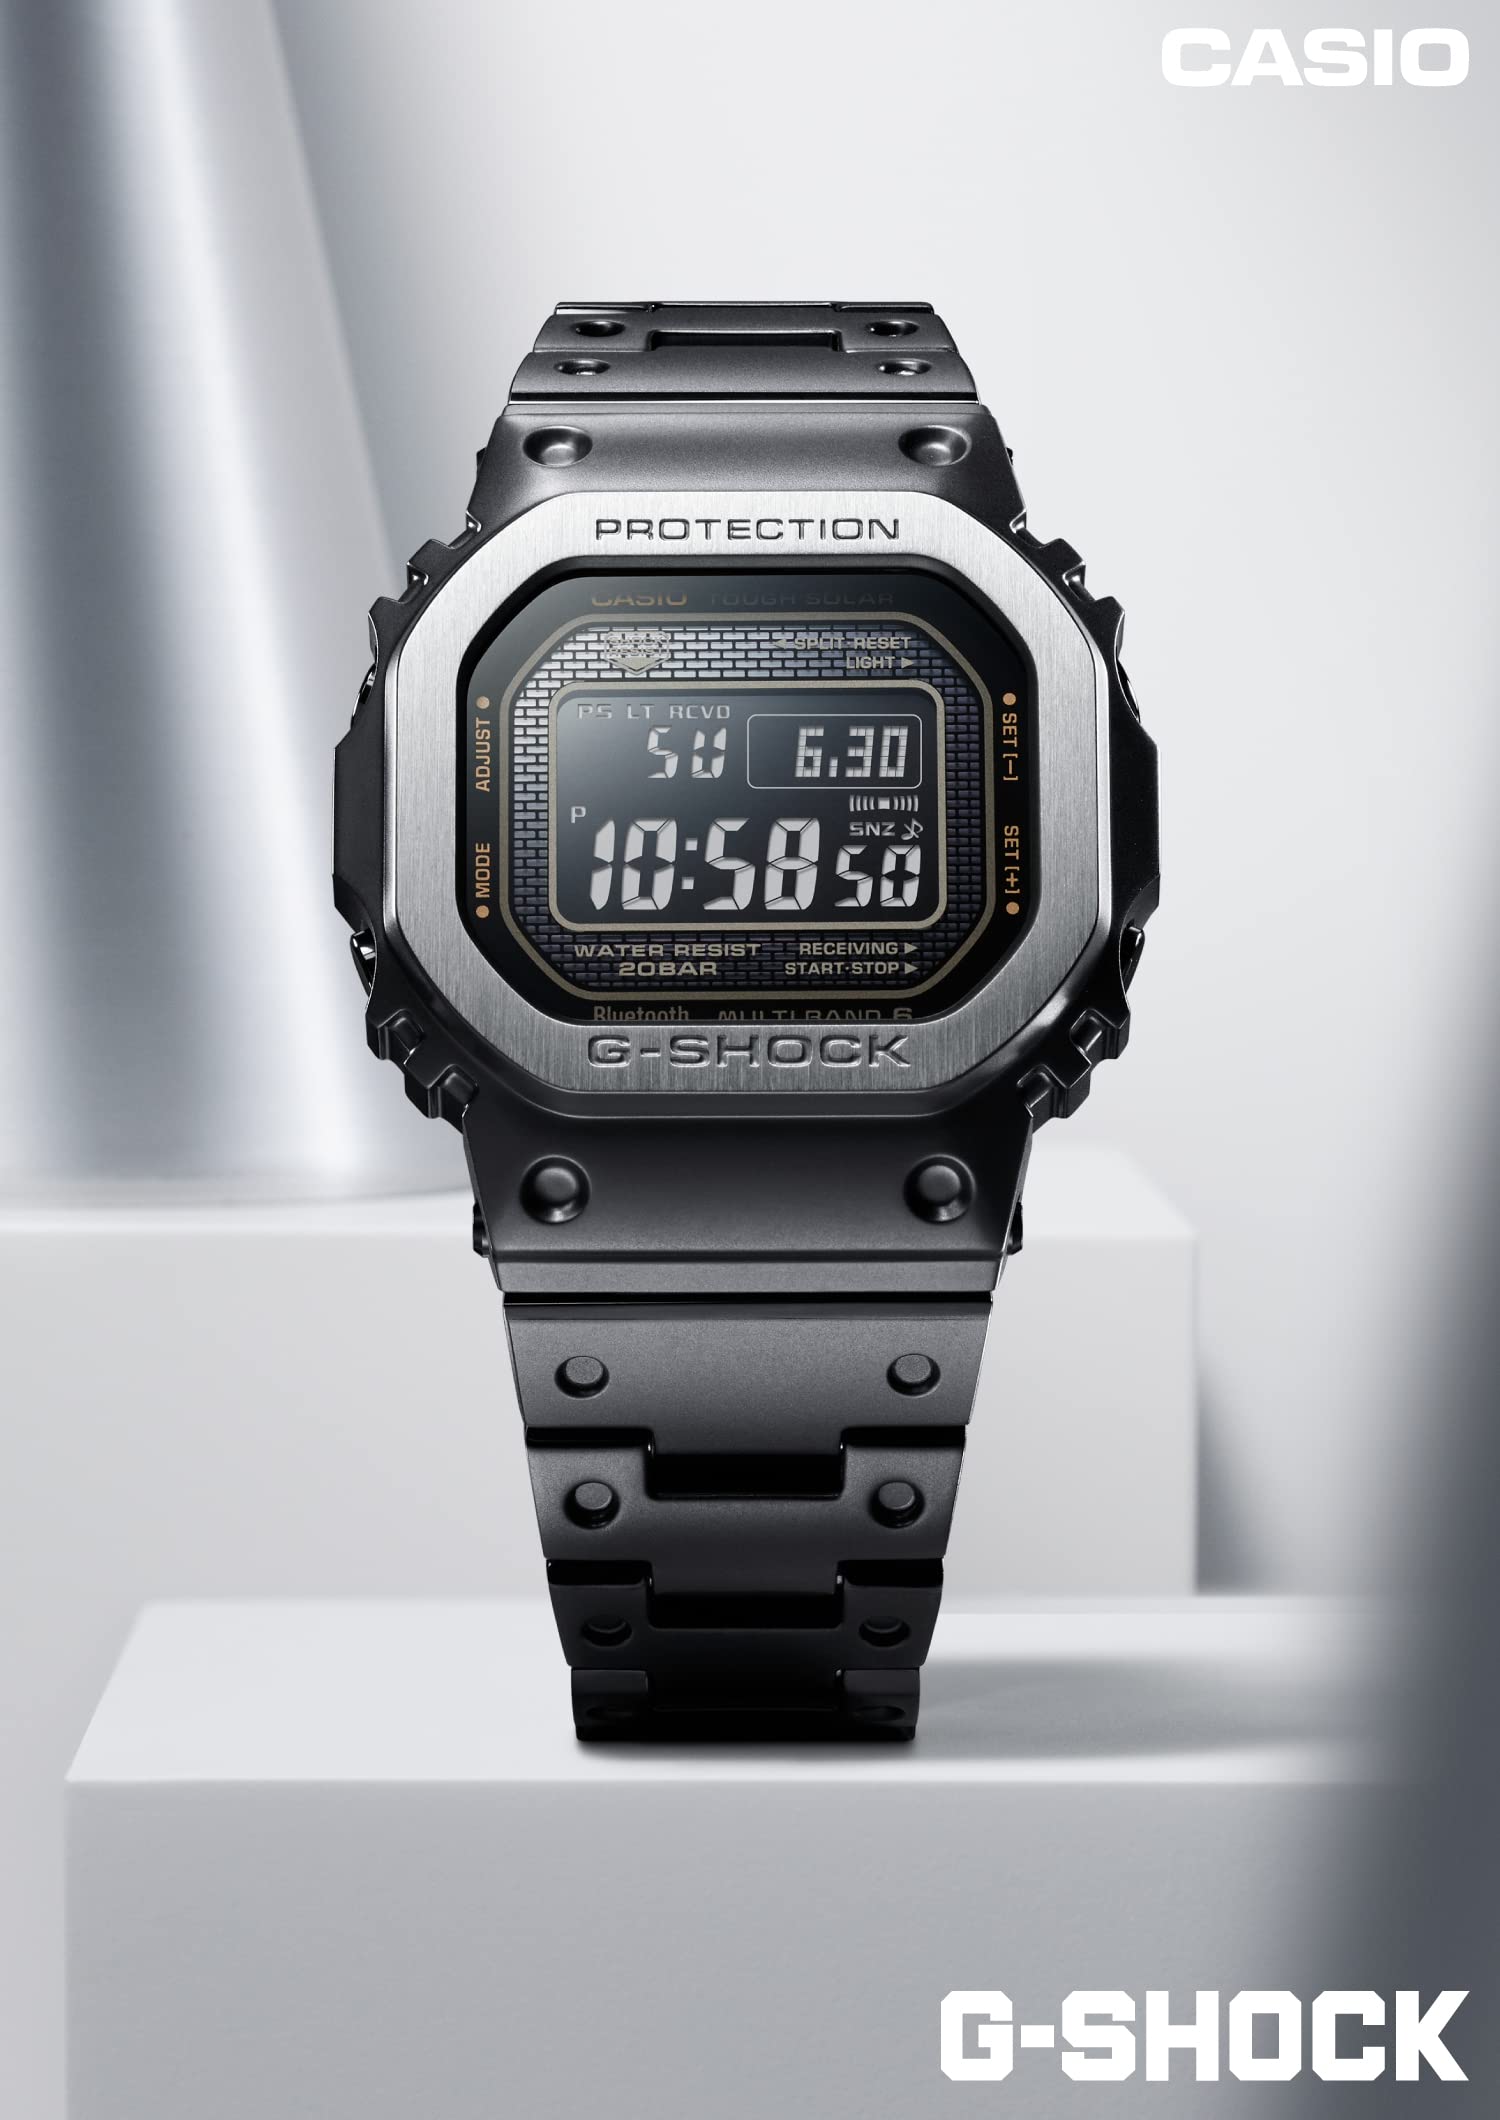 [Casio] G-Shock Watch [Domestic Genuine Product] Equipped with Bluetooth Full Metal Radio Solar Multi-finished Black GMW-B5000MB-1JF Men's Black - BanzaiHobby